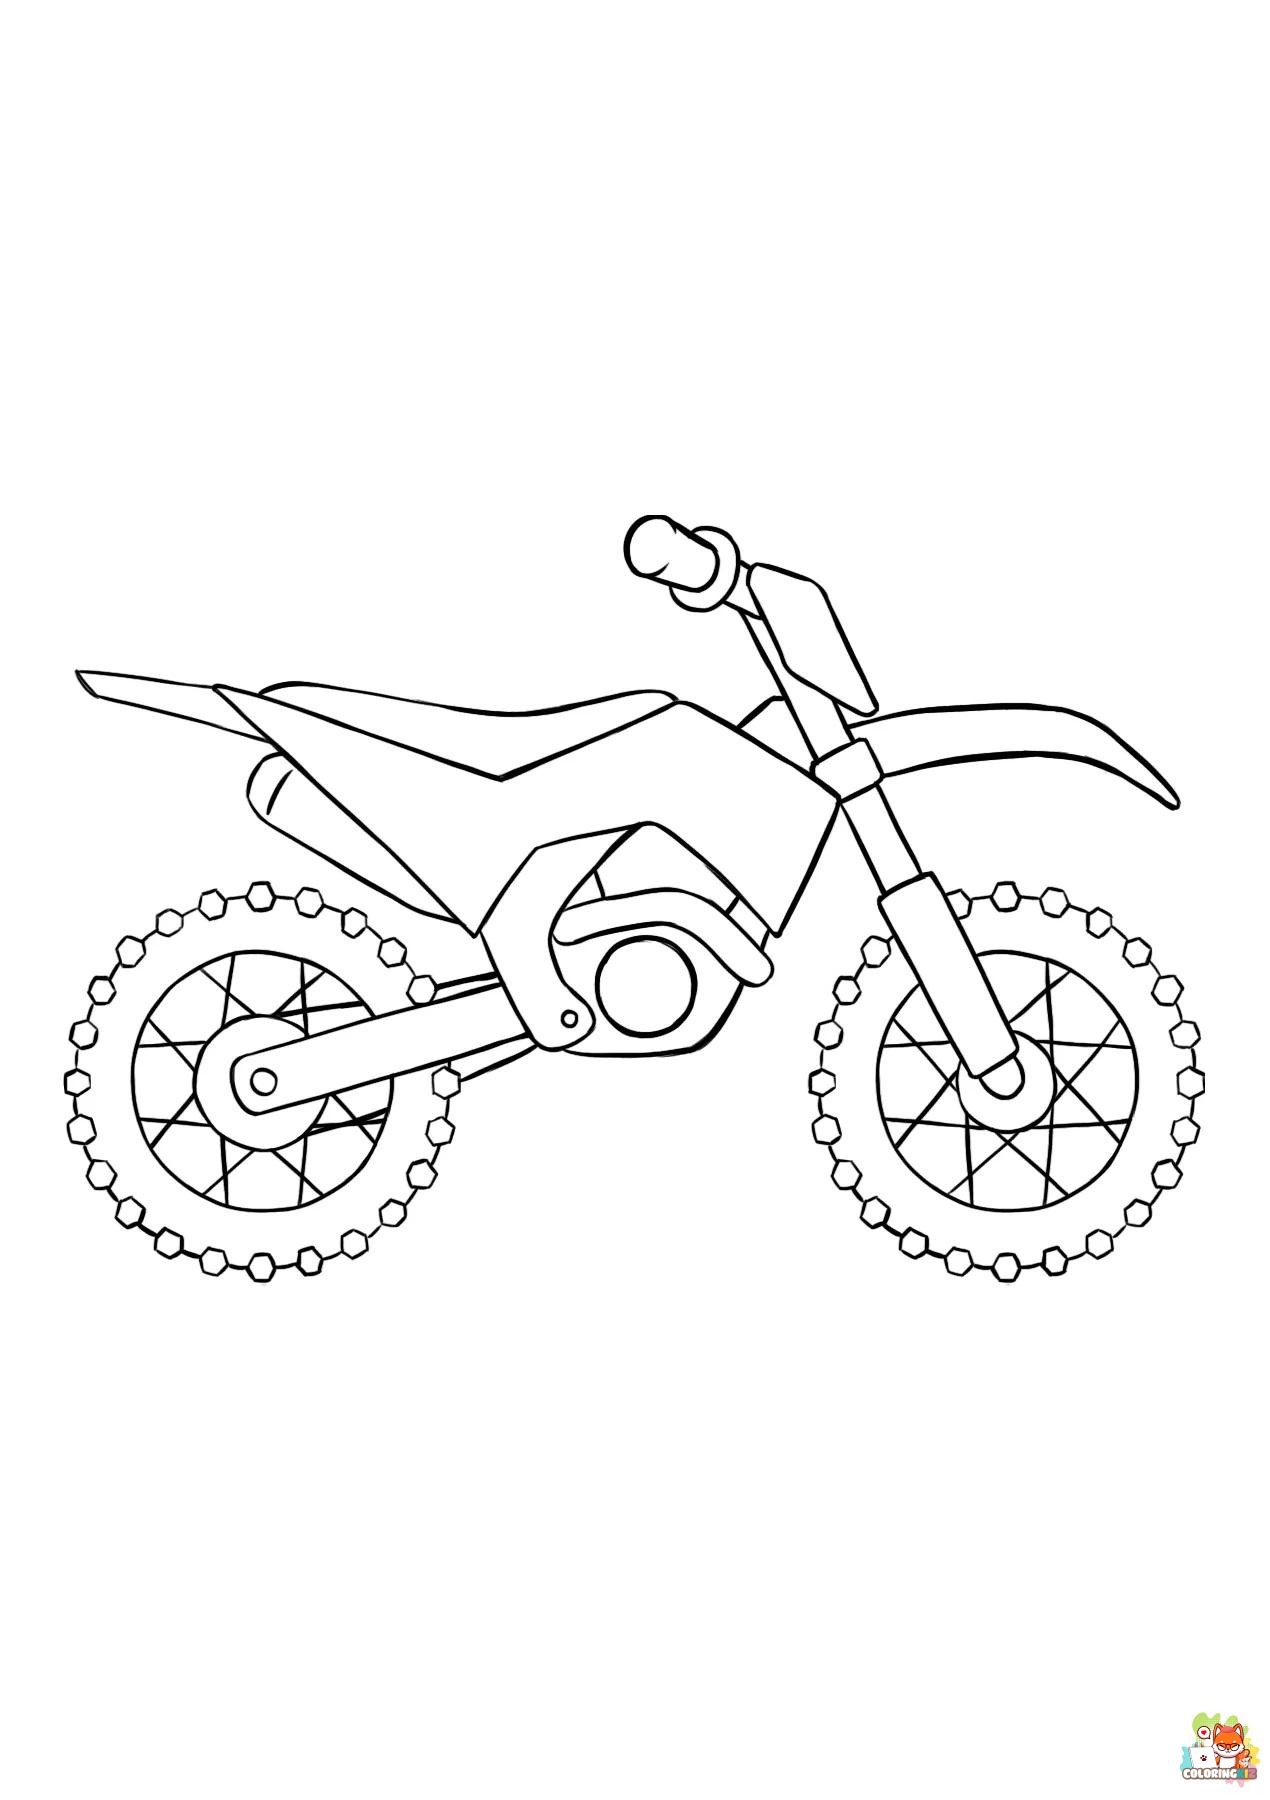 dirt bike coloring pages